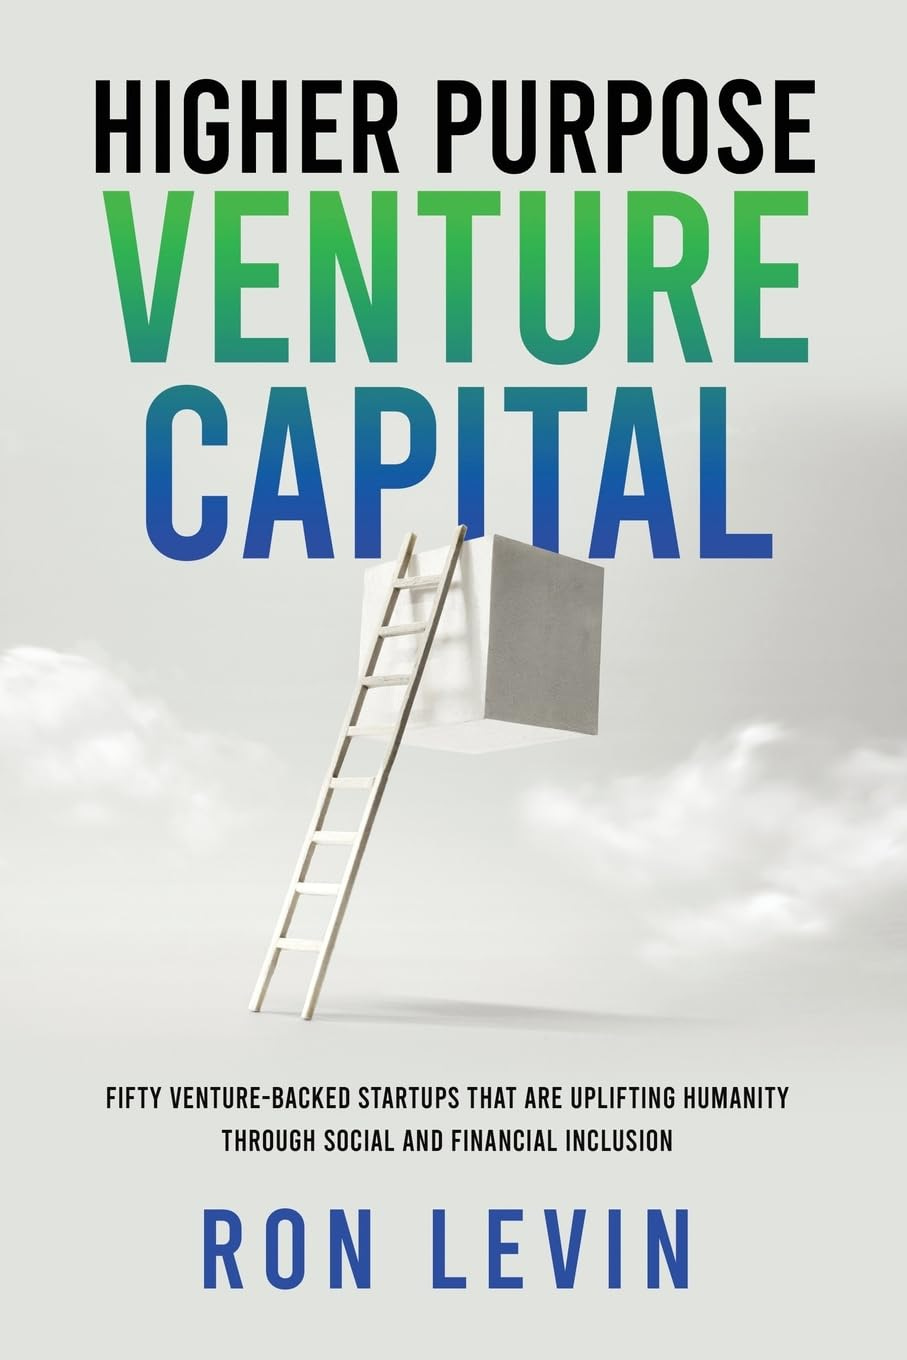 New book "Higher Purpose Venture Capital" by Ron Levin is releas - WICZ